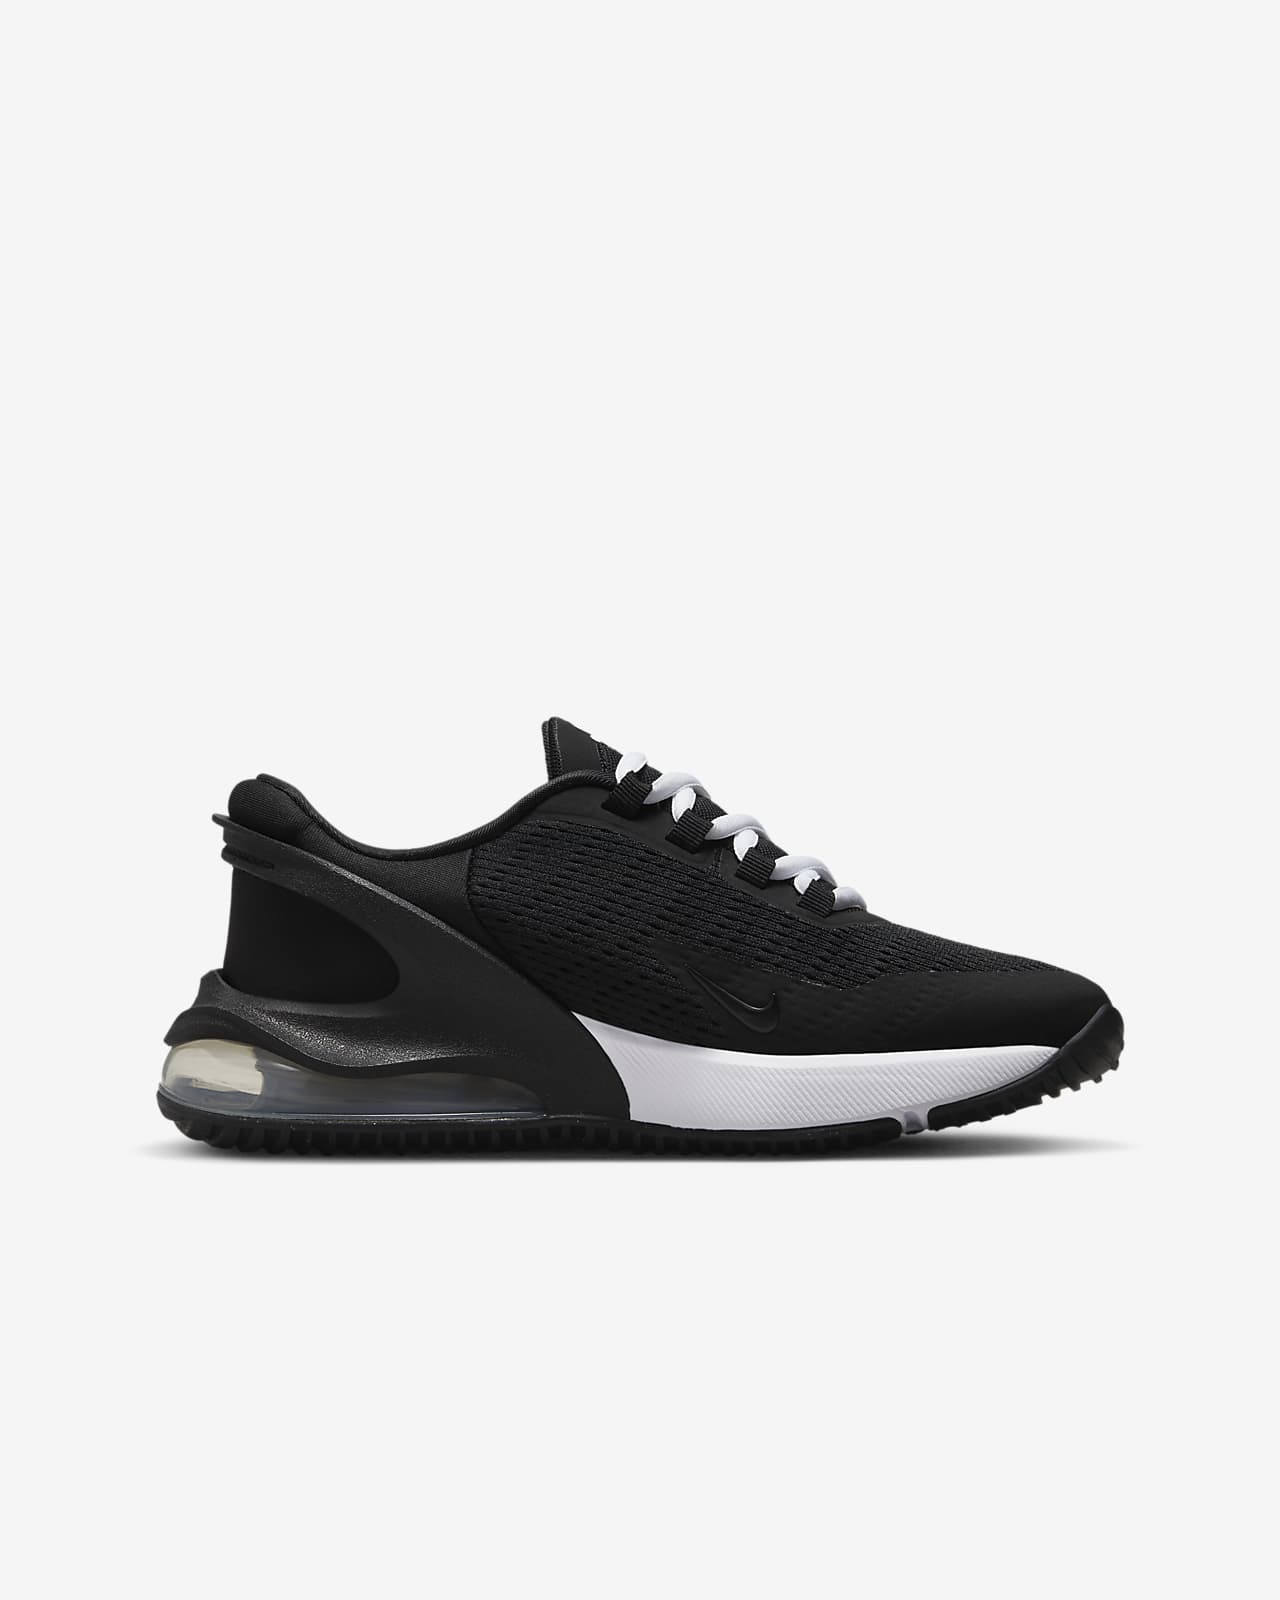 Nike Air Max 270 GO Younger Kids' Easy On/Off Shoes